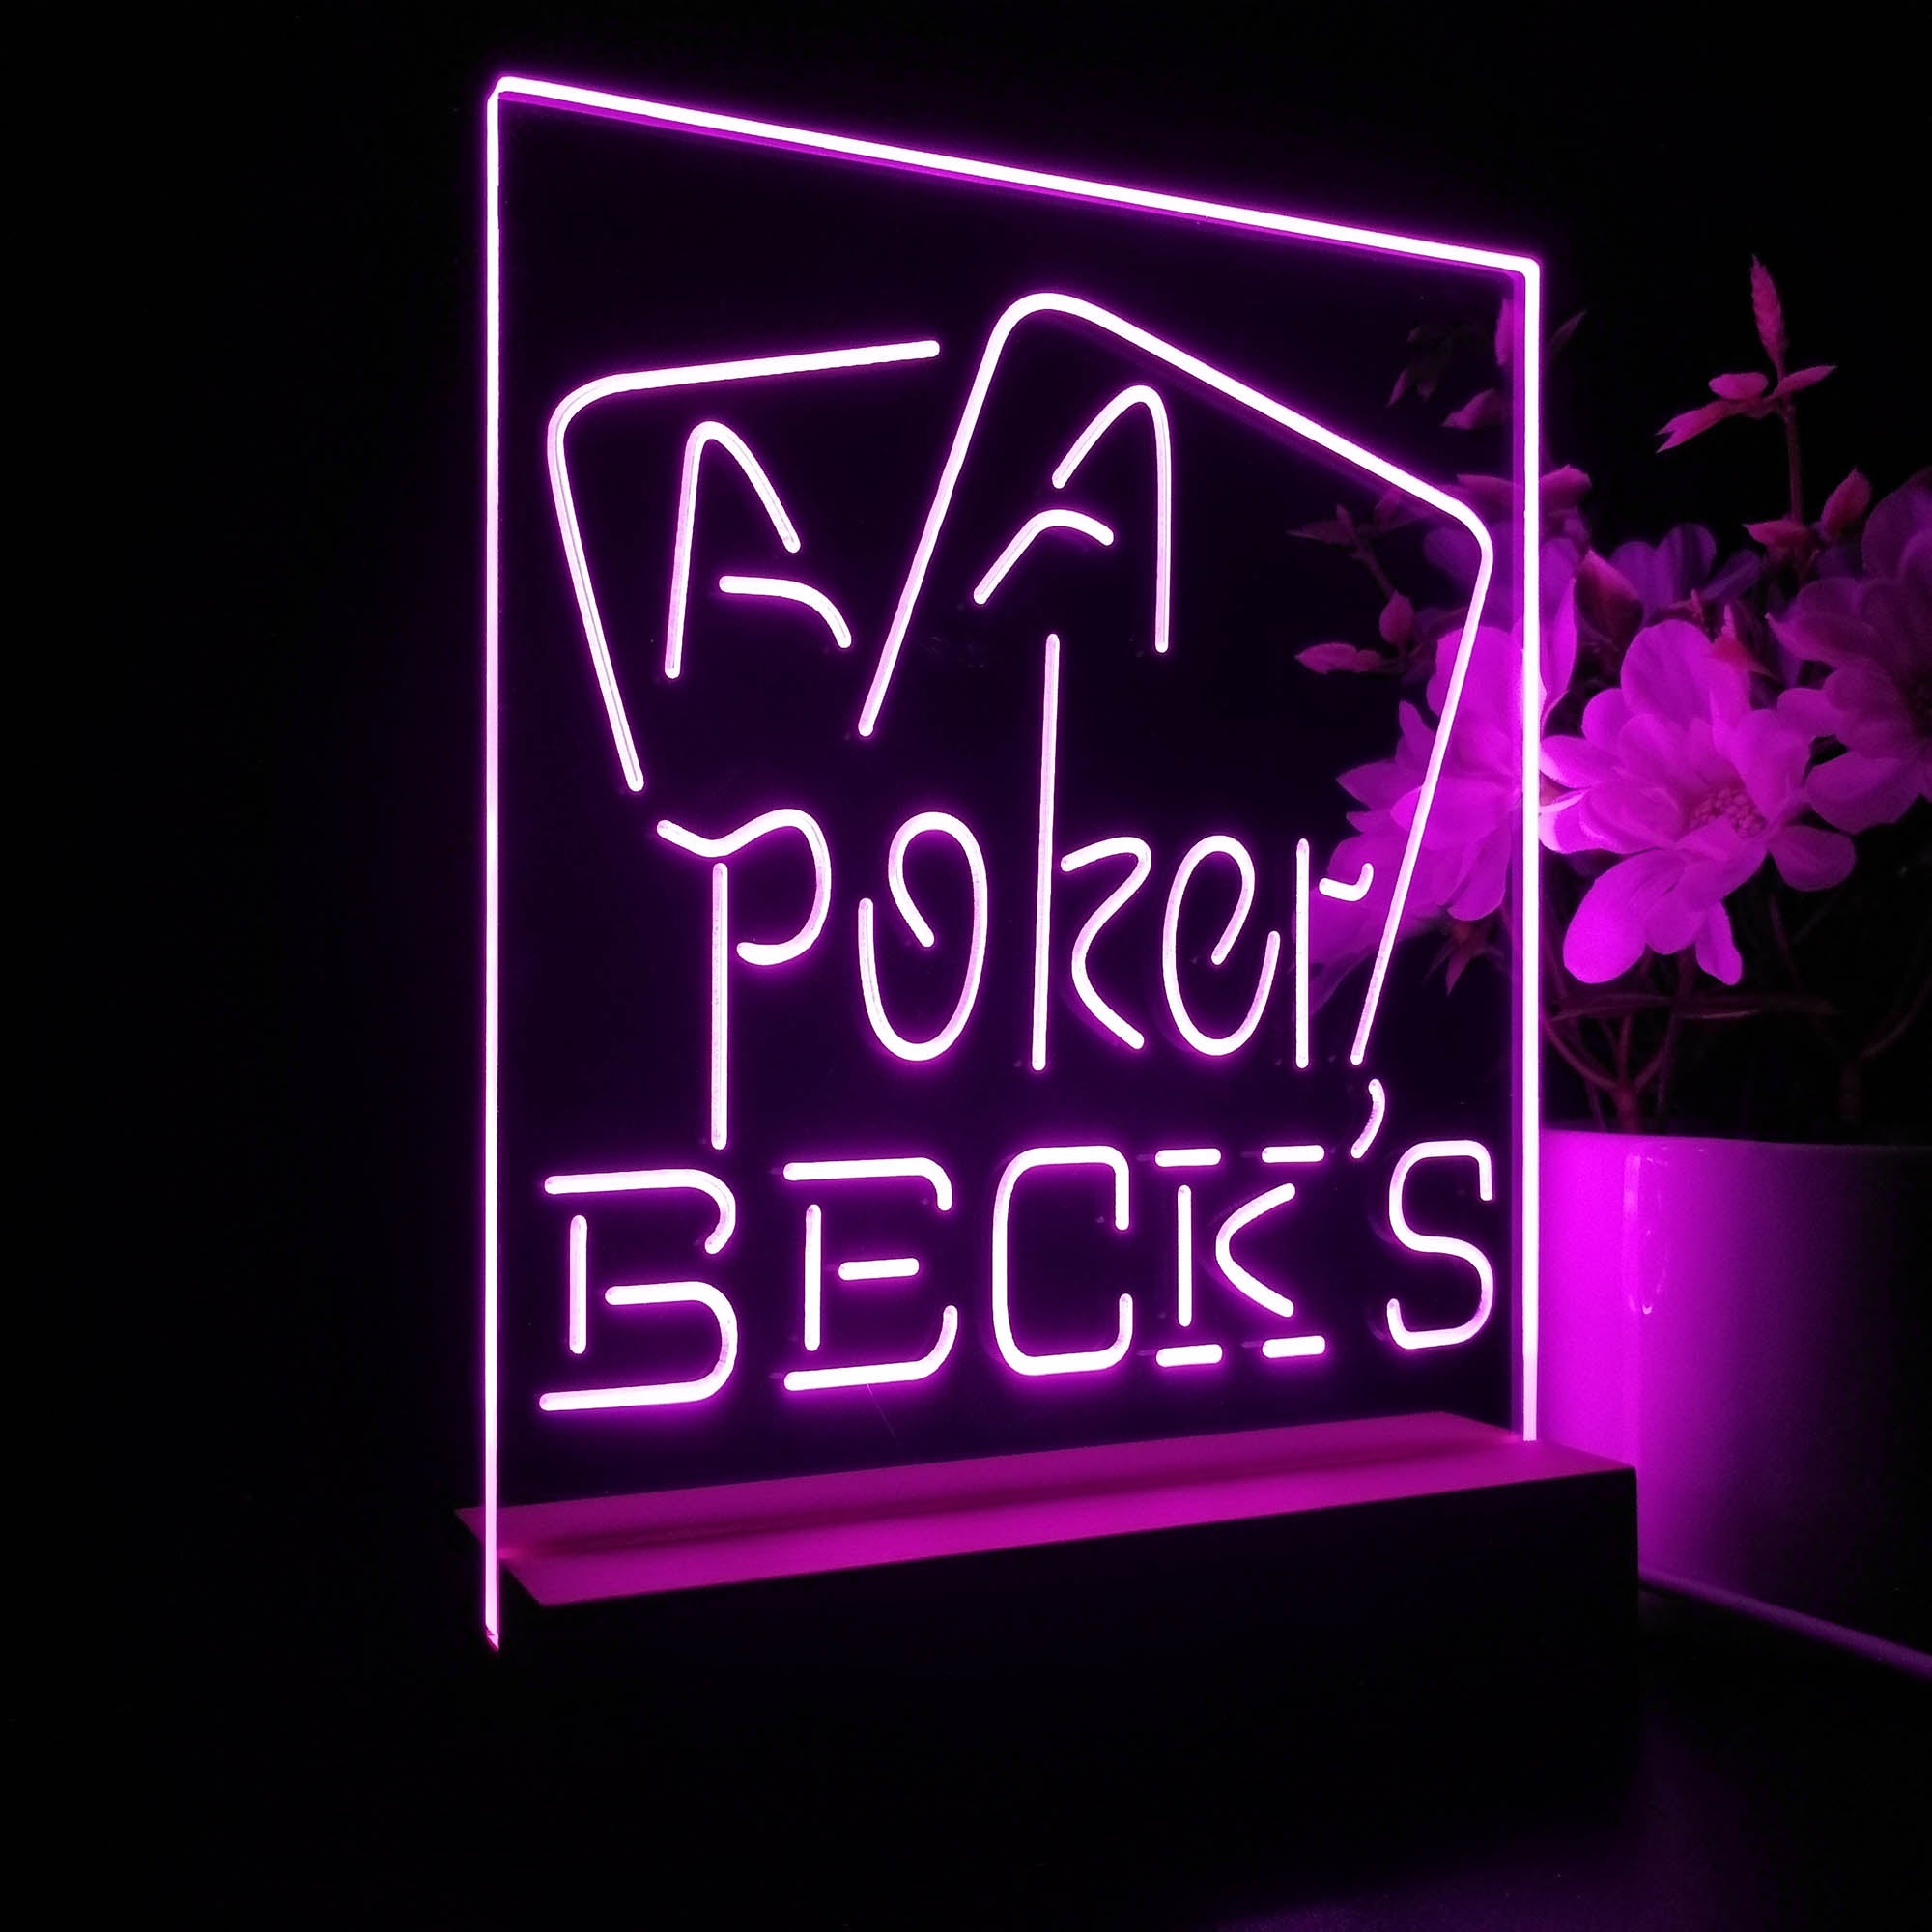 Beck's Poker Beer 3D LED Optical Illusion Night Light Table Lamp